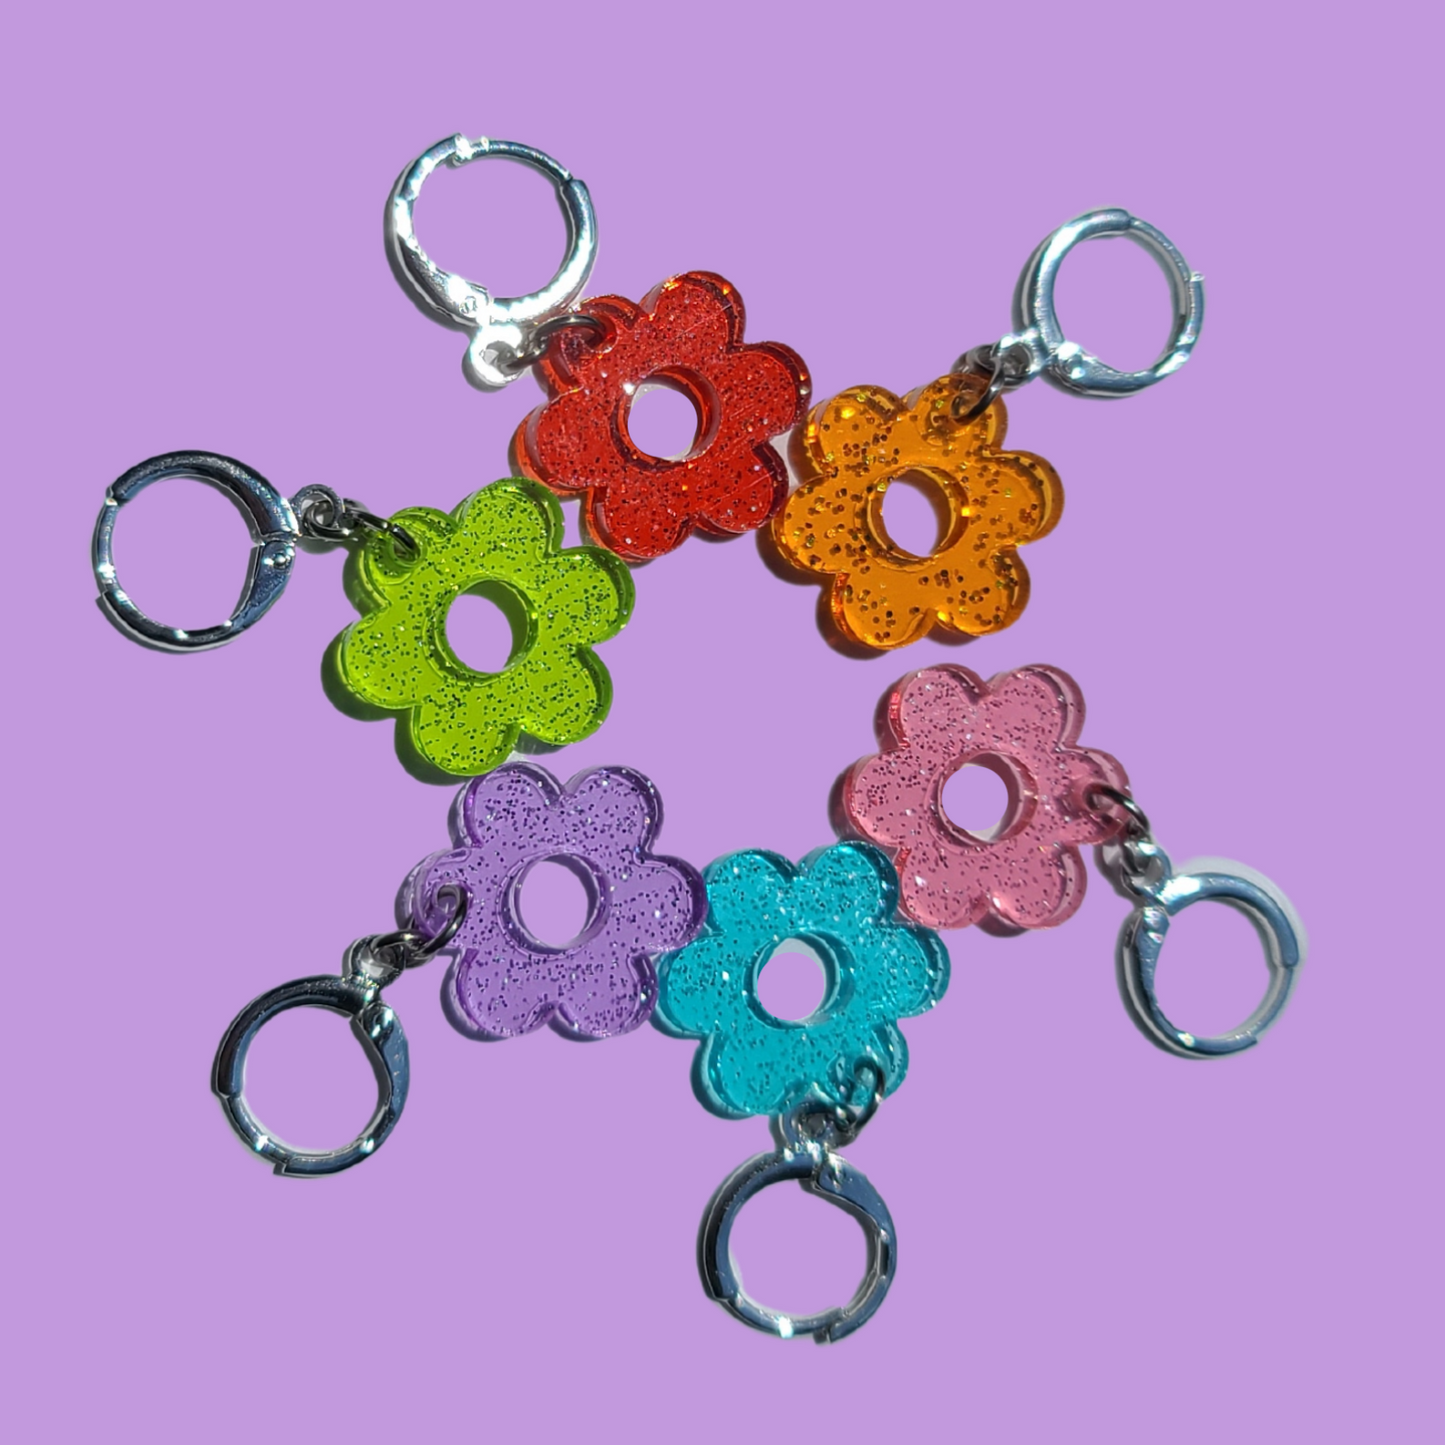 Glitter Jelly Daisies Rainbow Variety Pack of Small Hoops - Laser Cut Earrings